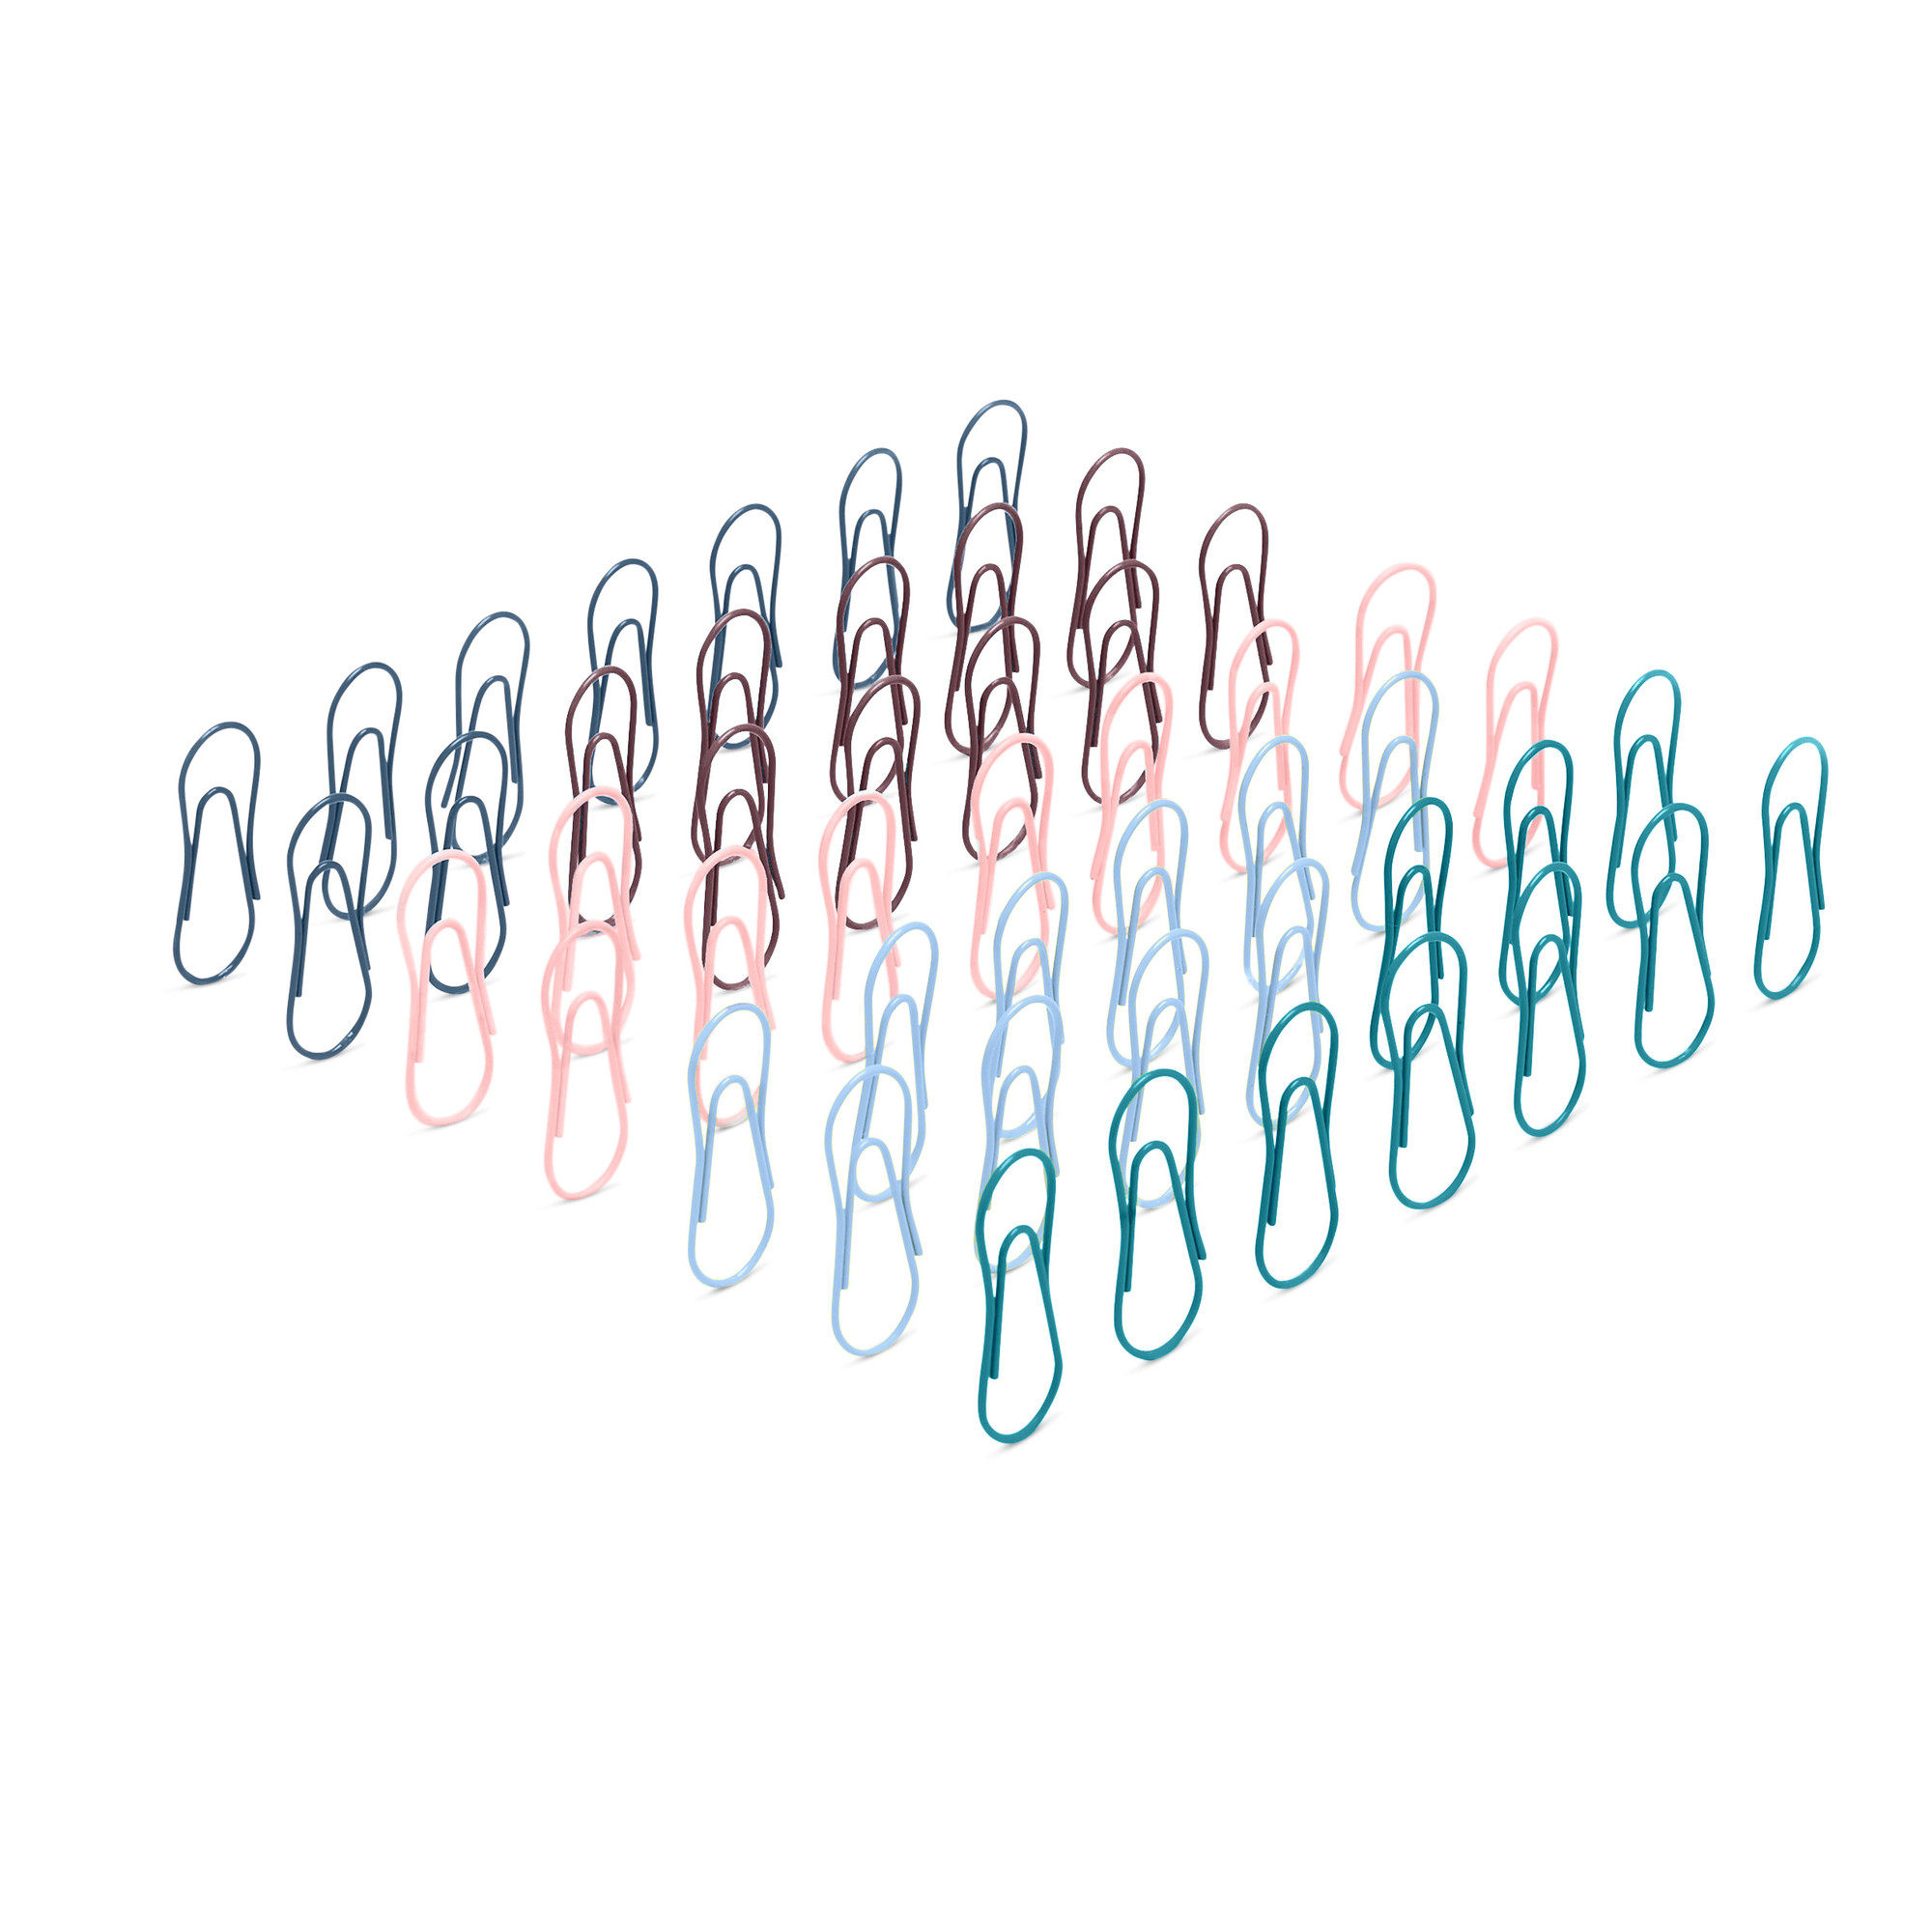 Paper Clips, Box of 50